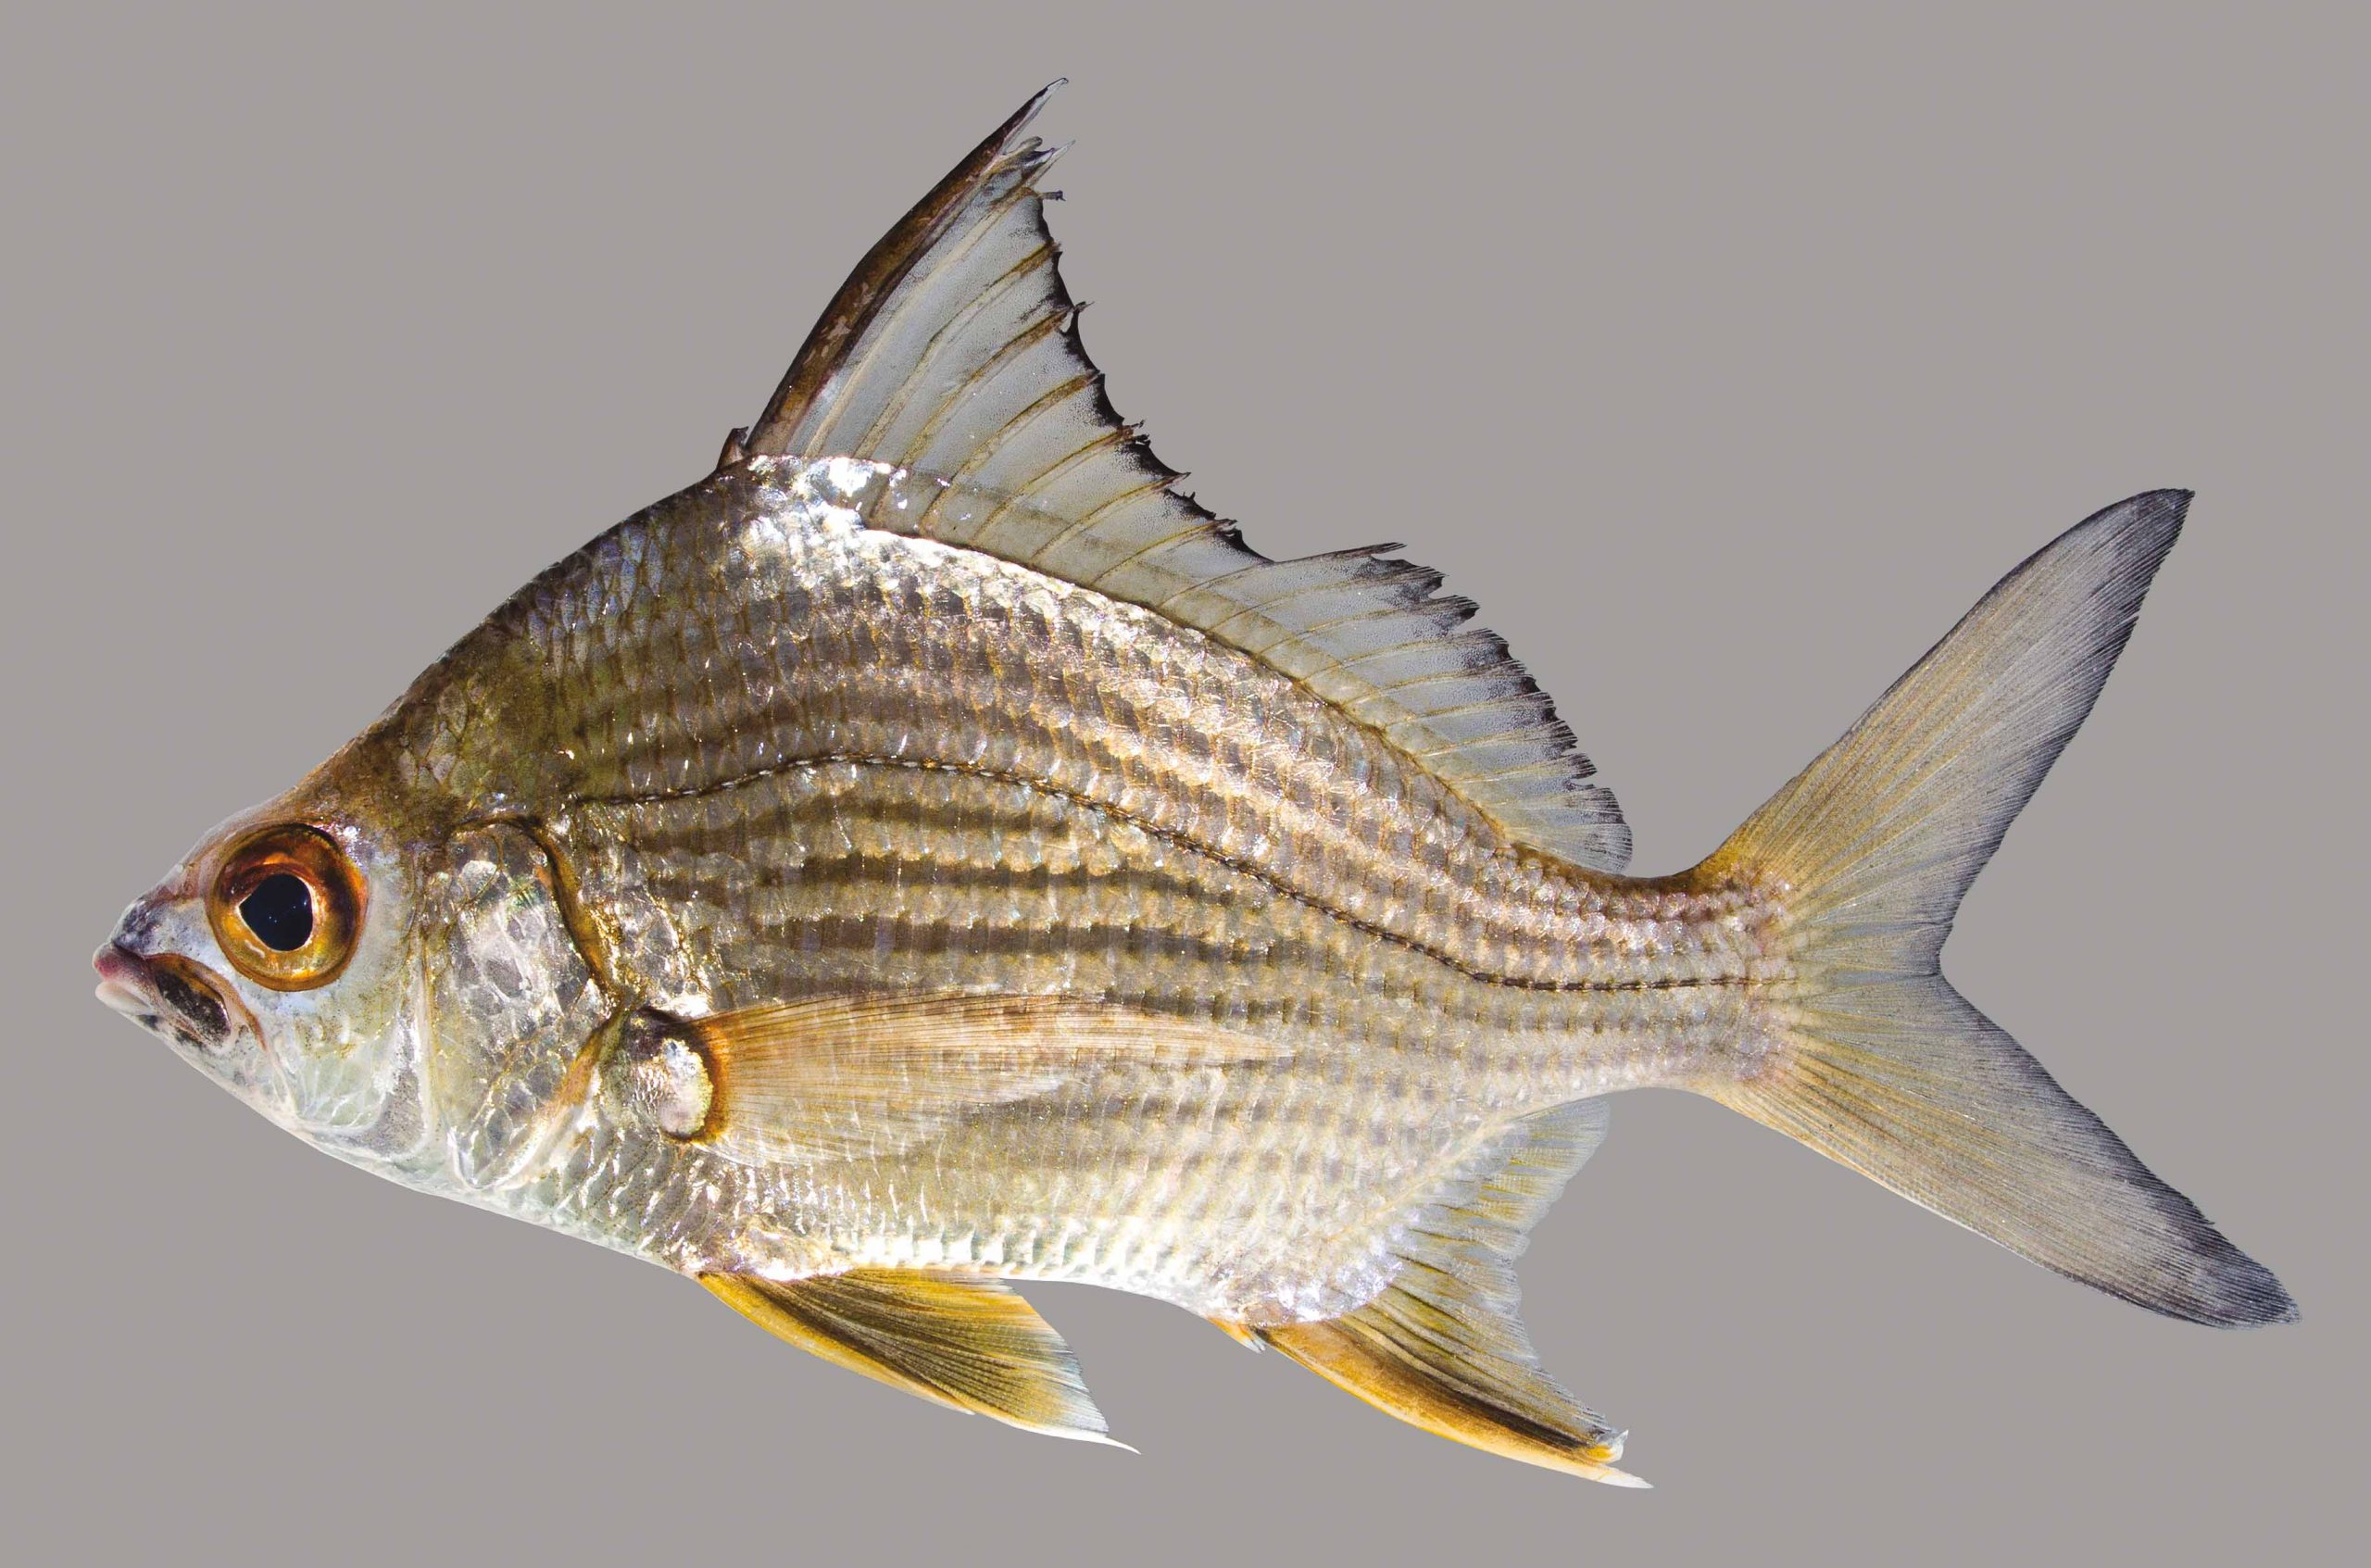 Lateral view of a tidewater mojarra